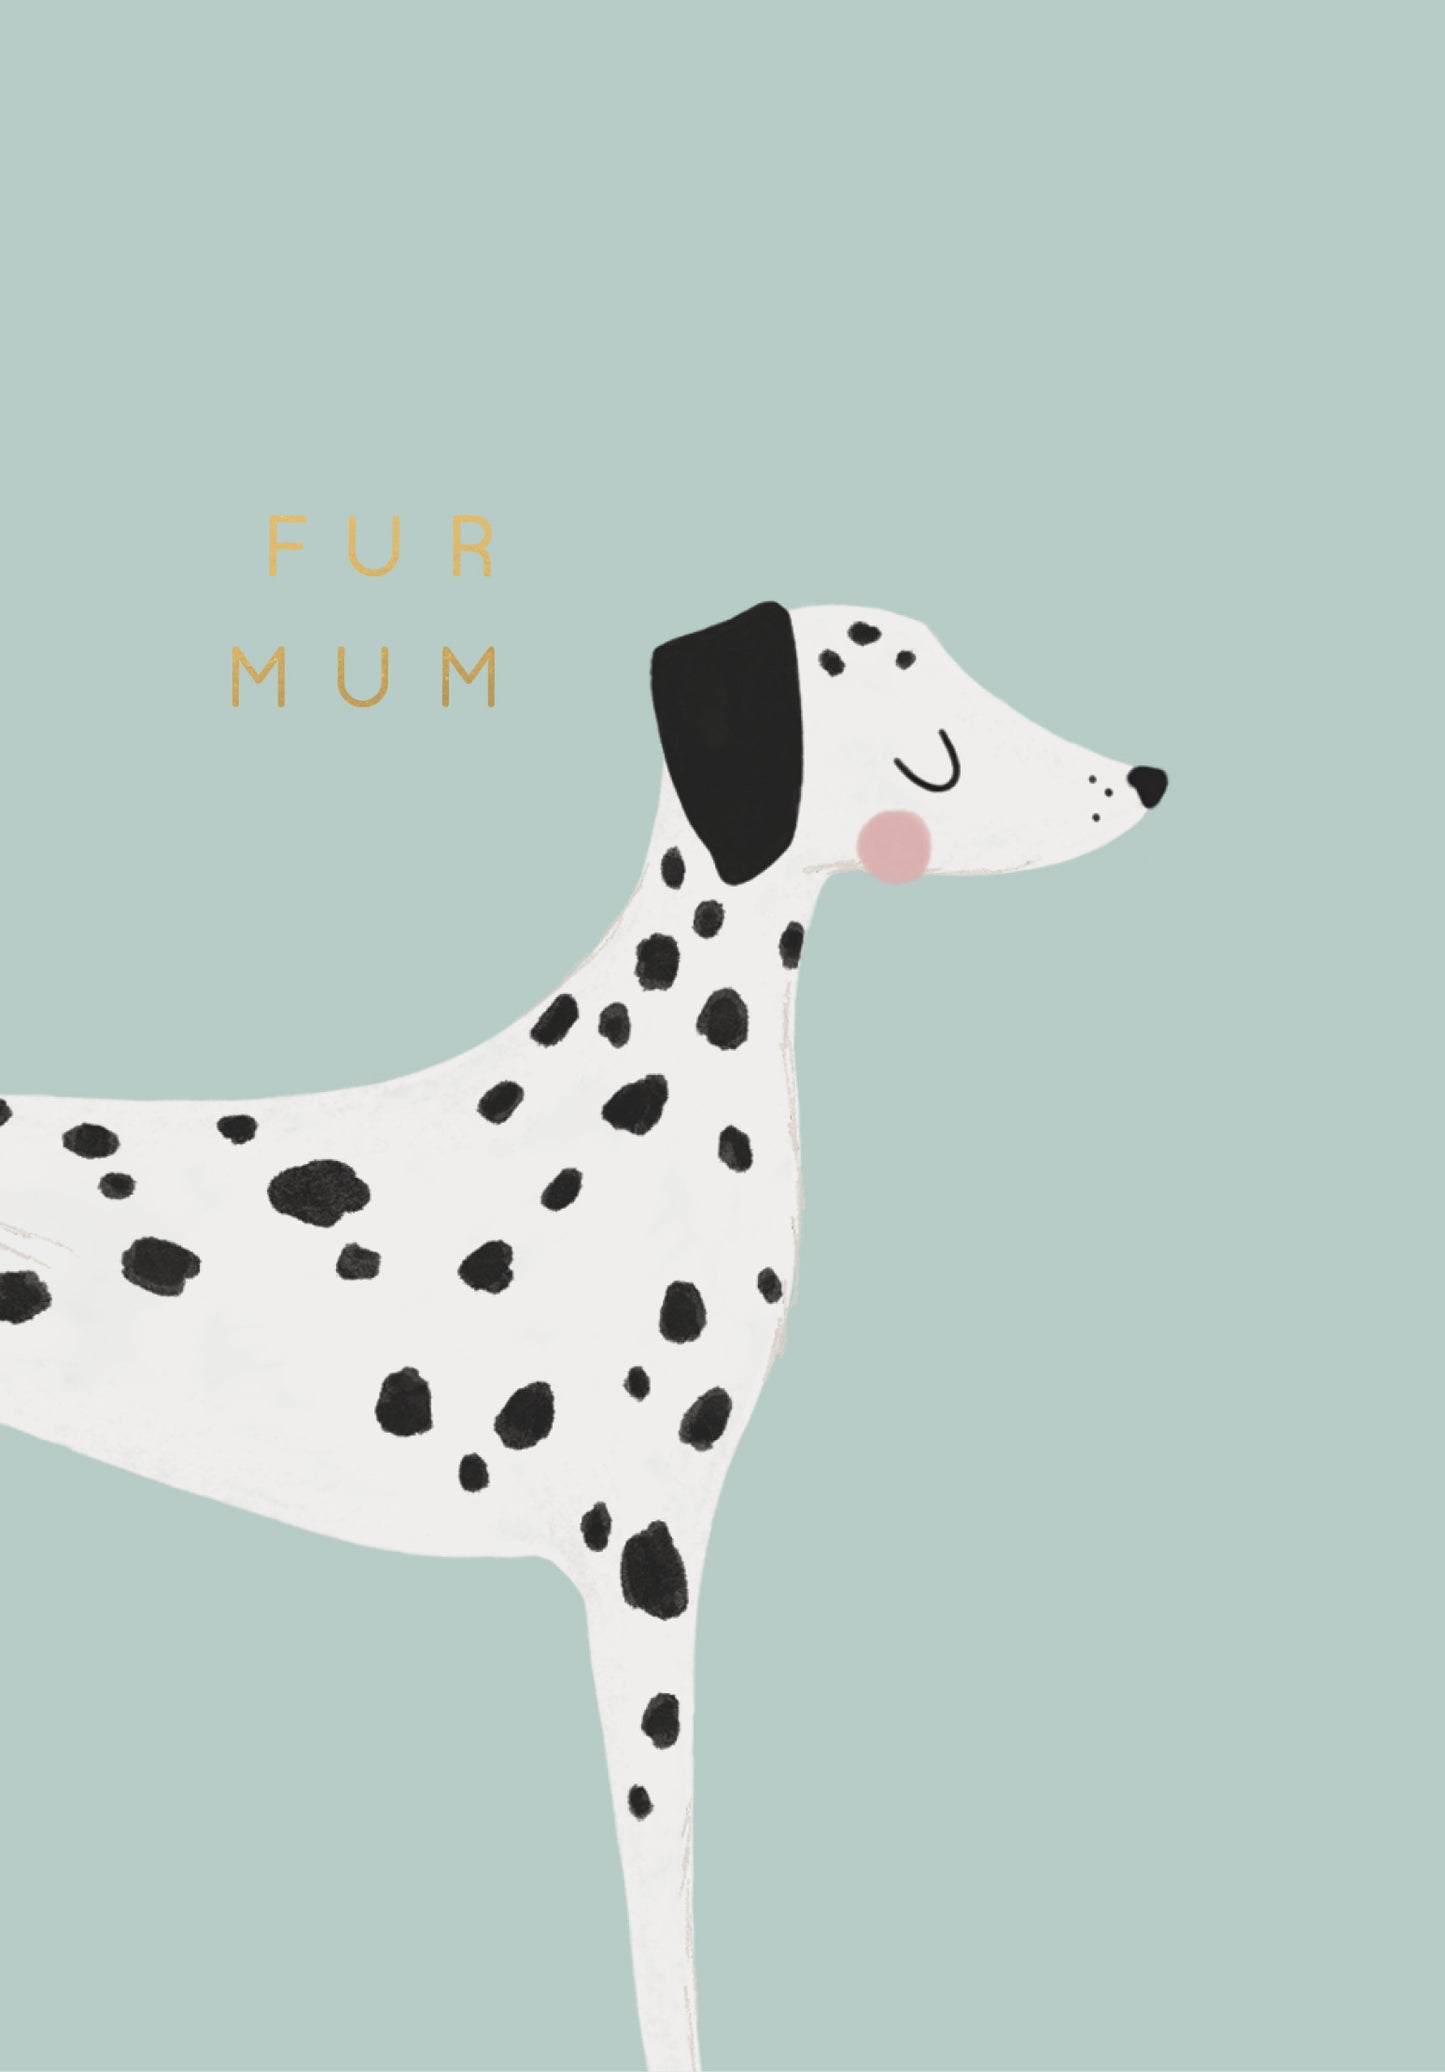 Greeting Card Mothers Day - Fur Mum